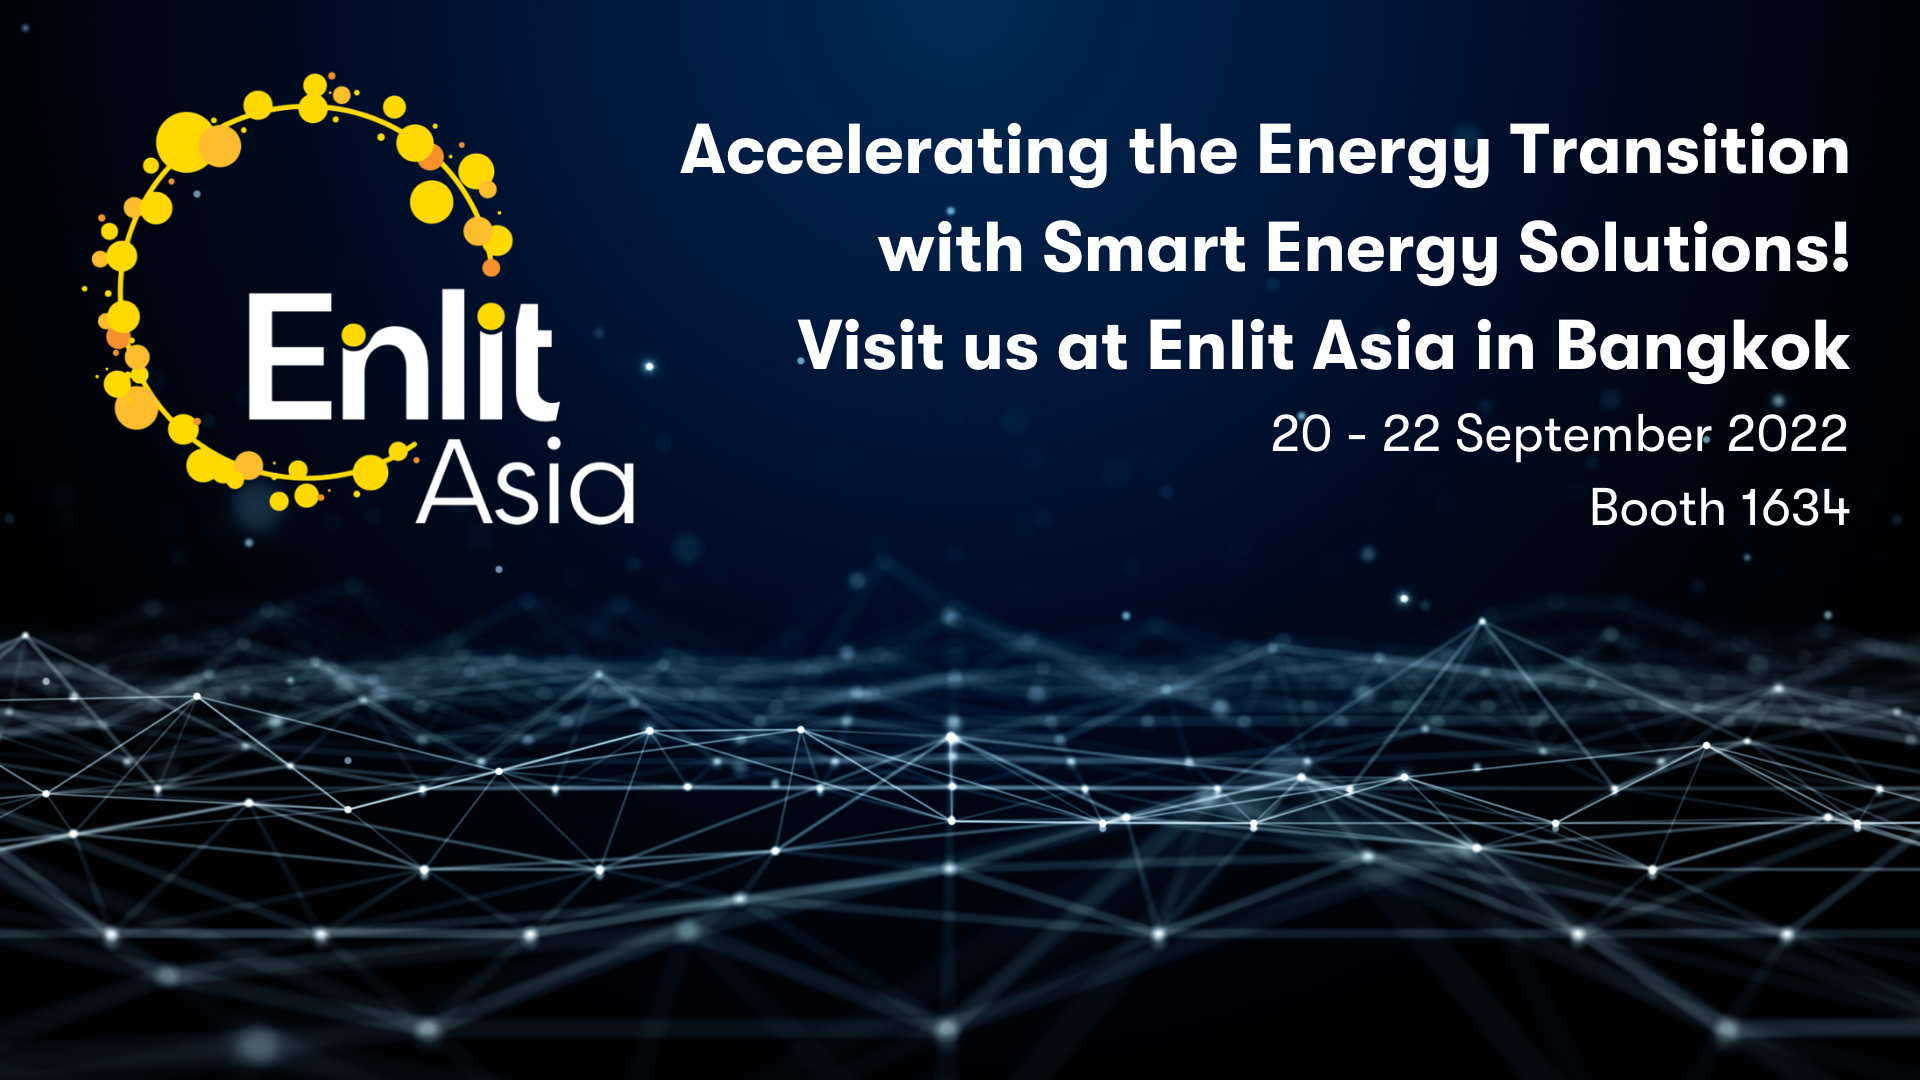 uploads/pics/https://technischerservice.iqony.energy/uploads/pics/Accelerating_the_Energy_Transition_with_Smart_Digital_Solutions_Visit_us_at_Enlit_Asia_in_Bangkok__1__19.png